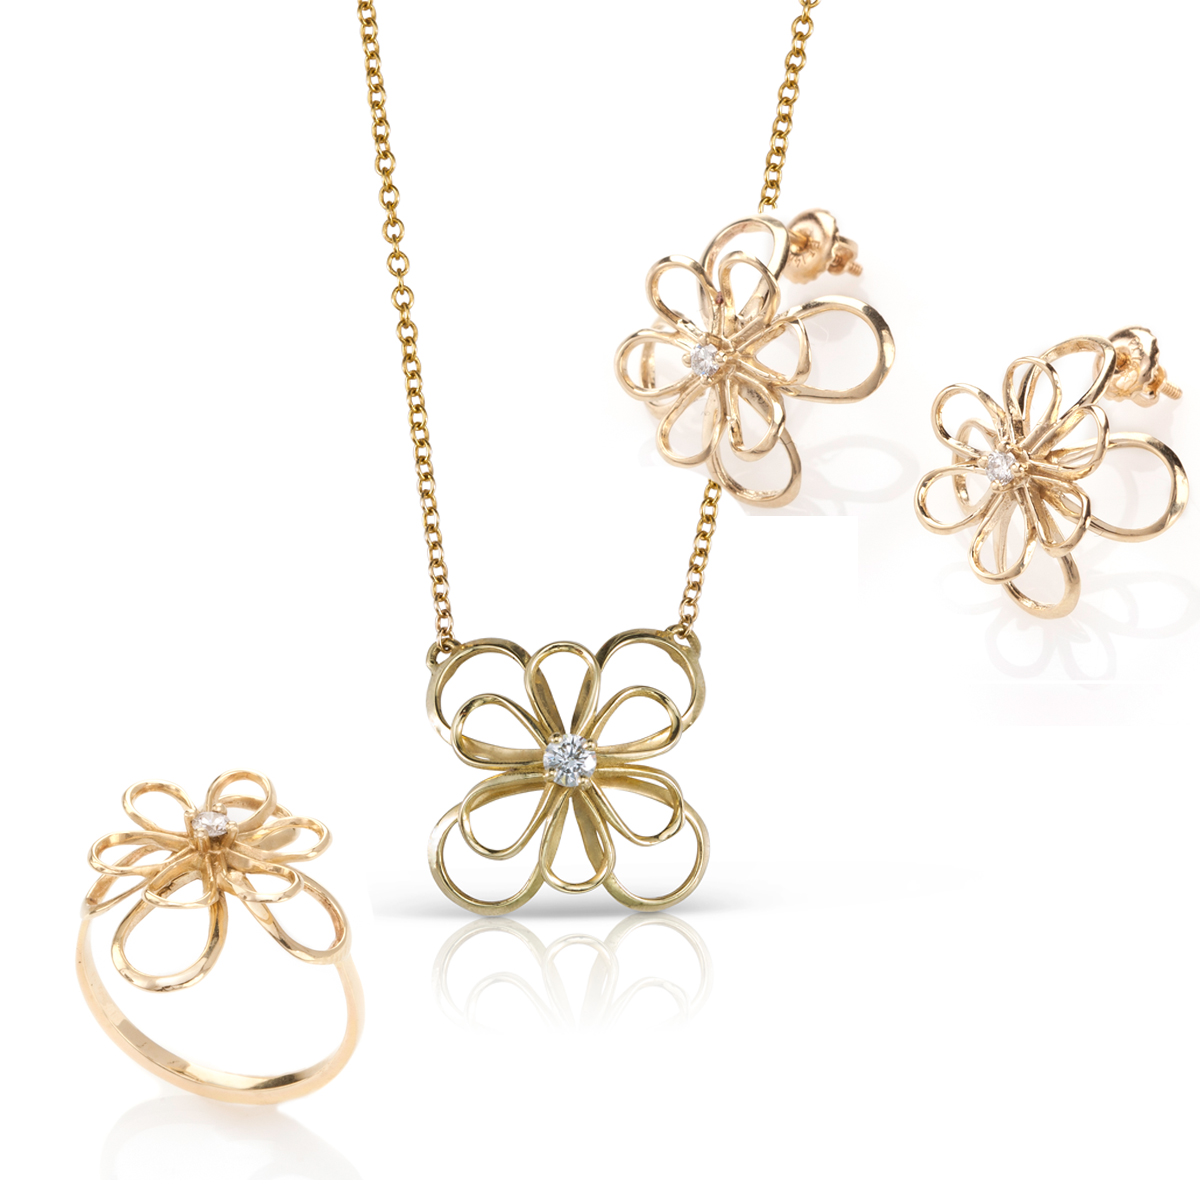 A set of gold jewelry in the shape of a flower and diamonds